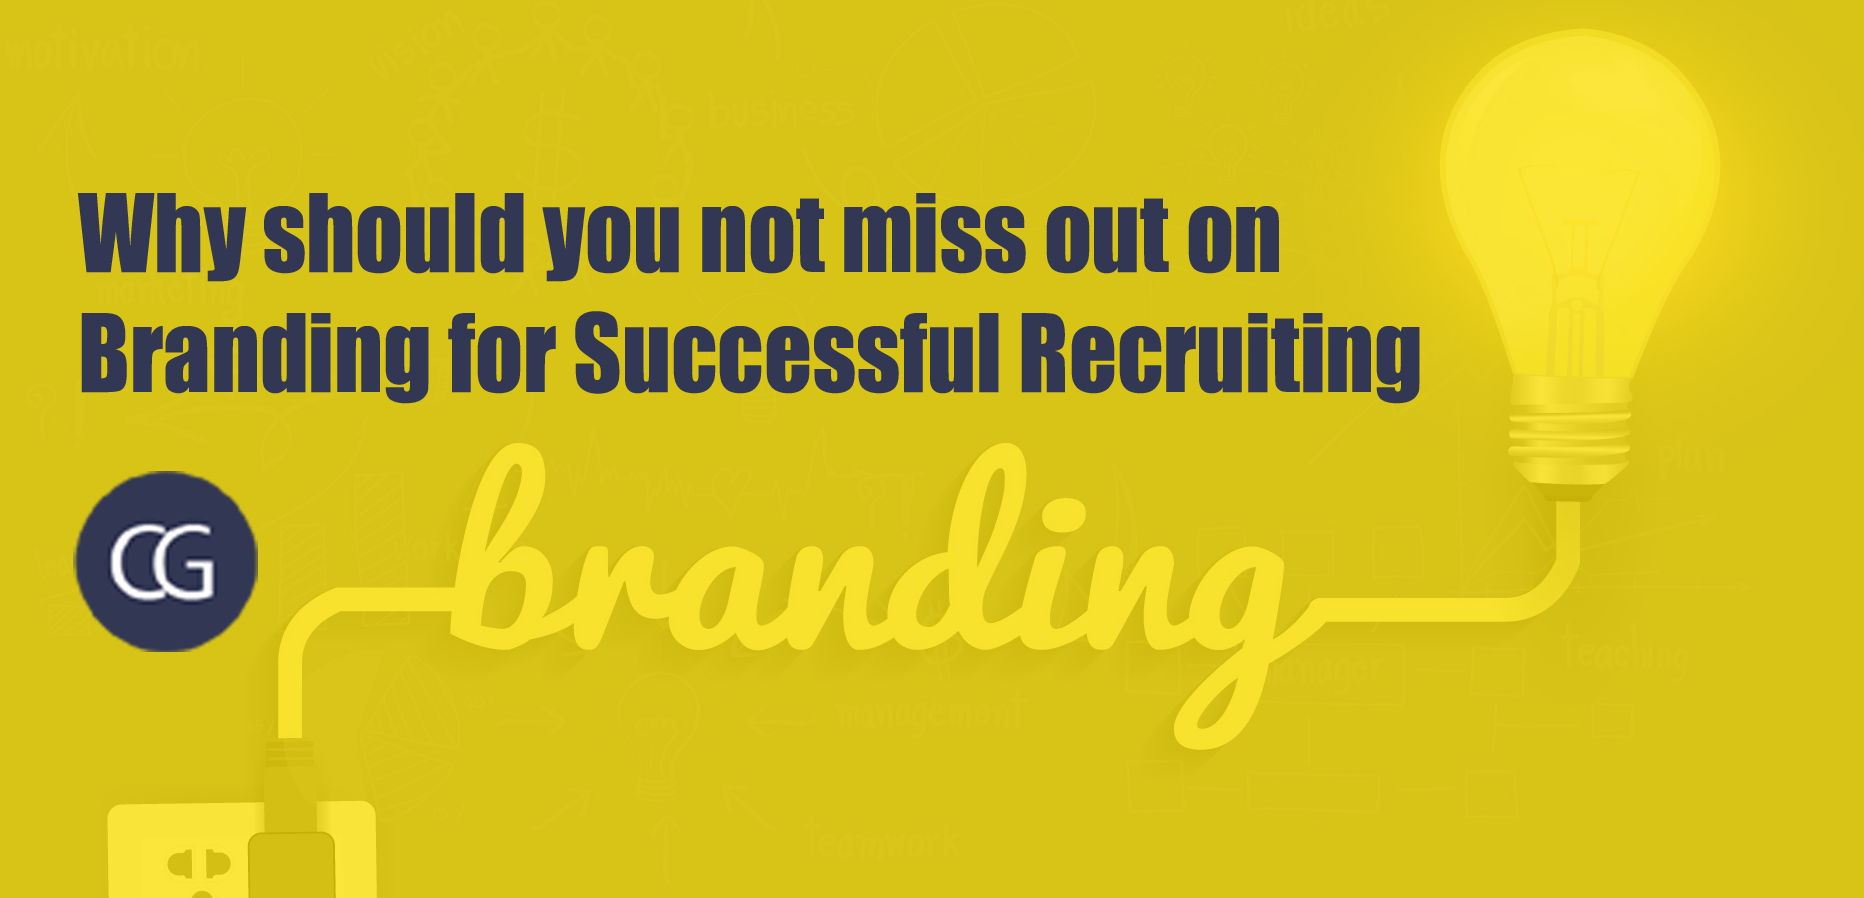 Why should you not miss out on Branding for Successful Recruiting